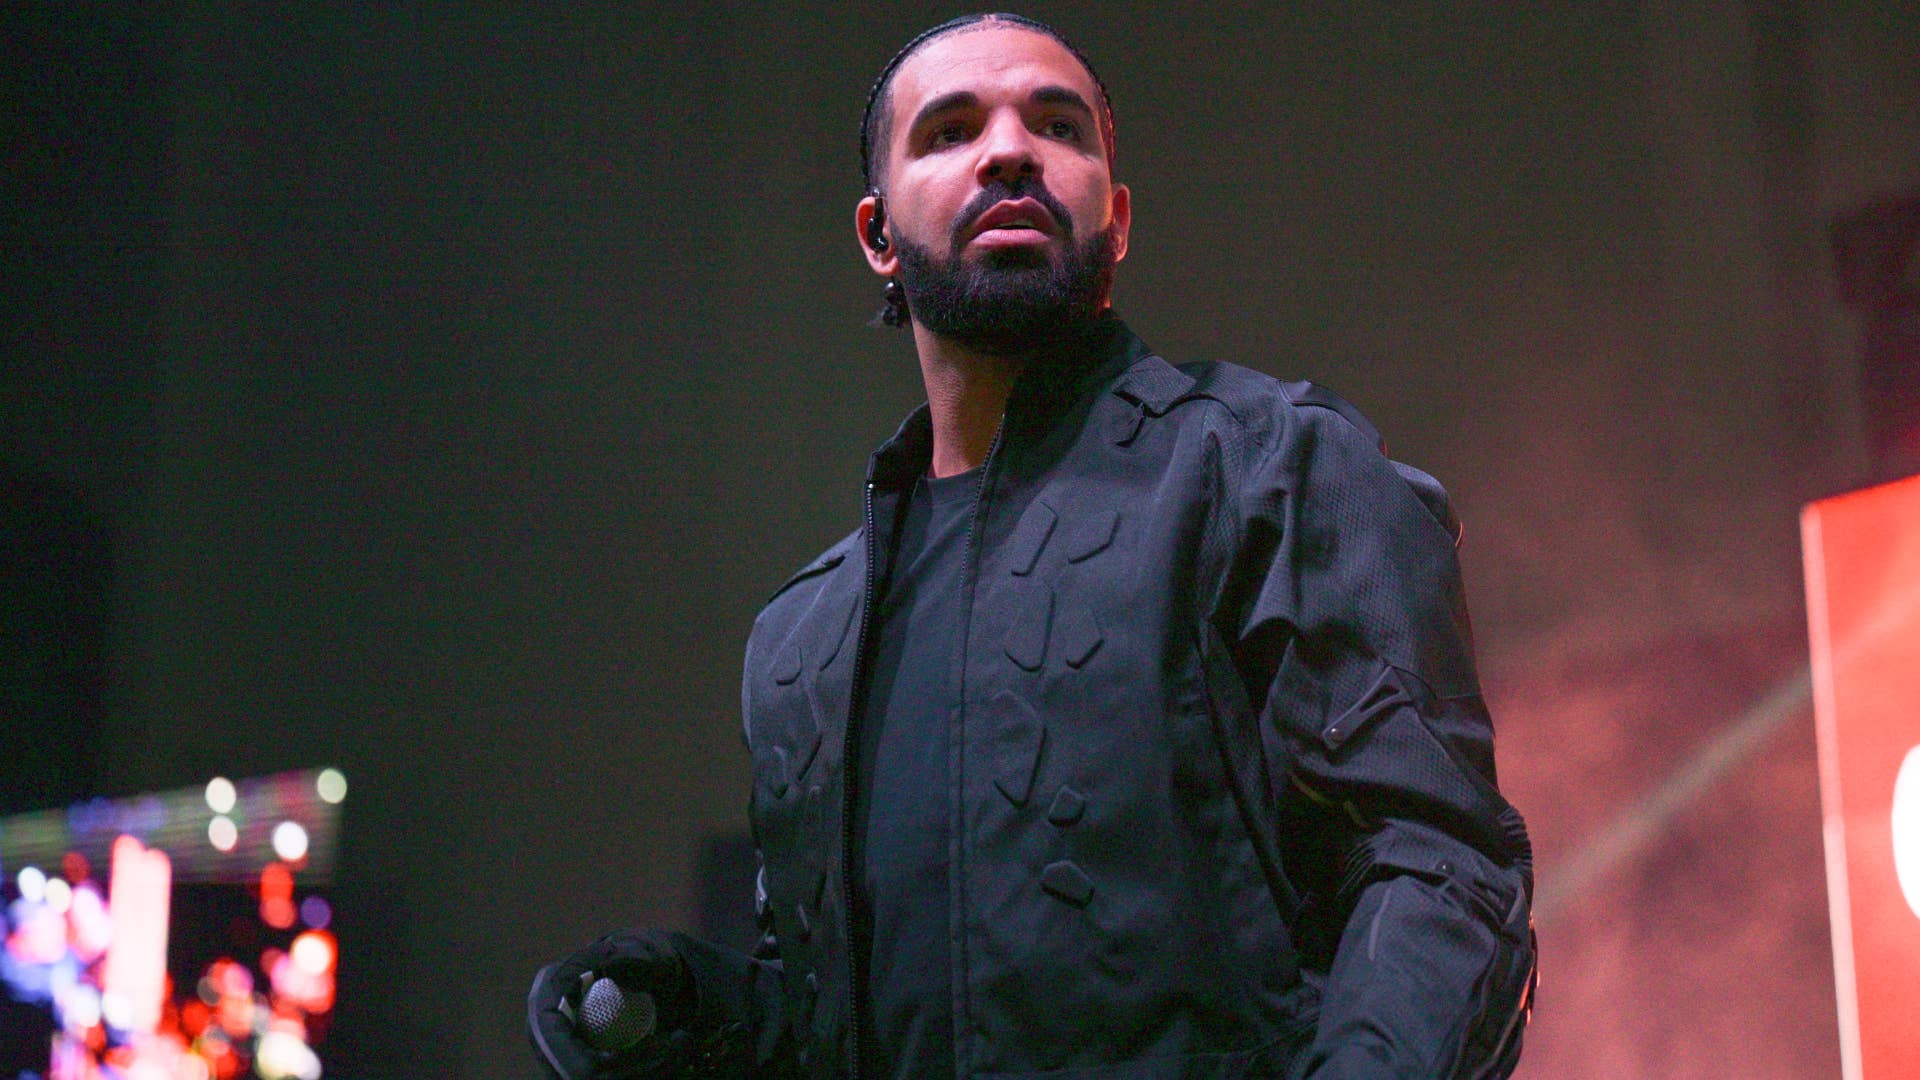 Drake is seen performing live